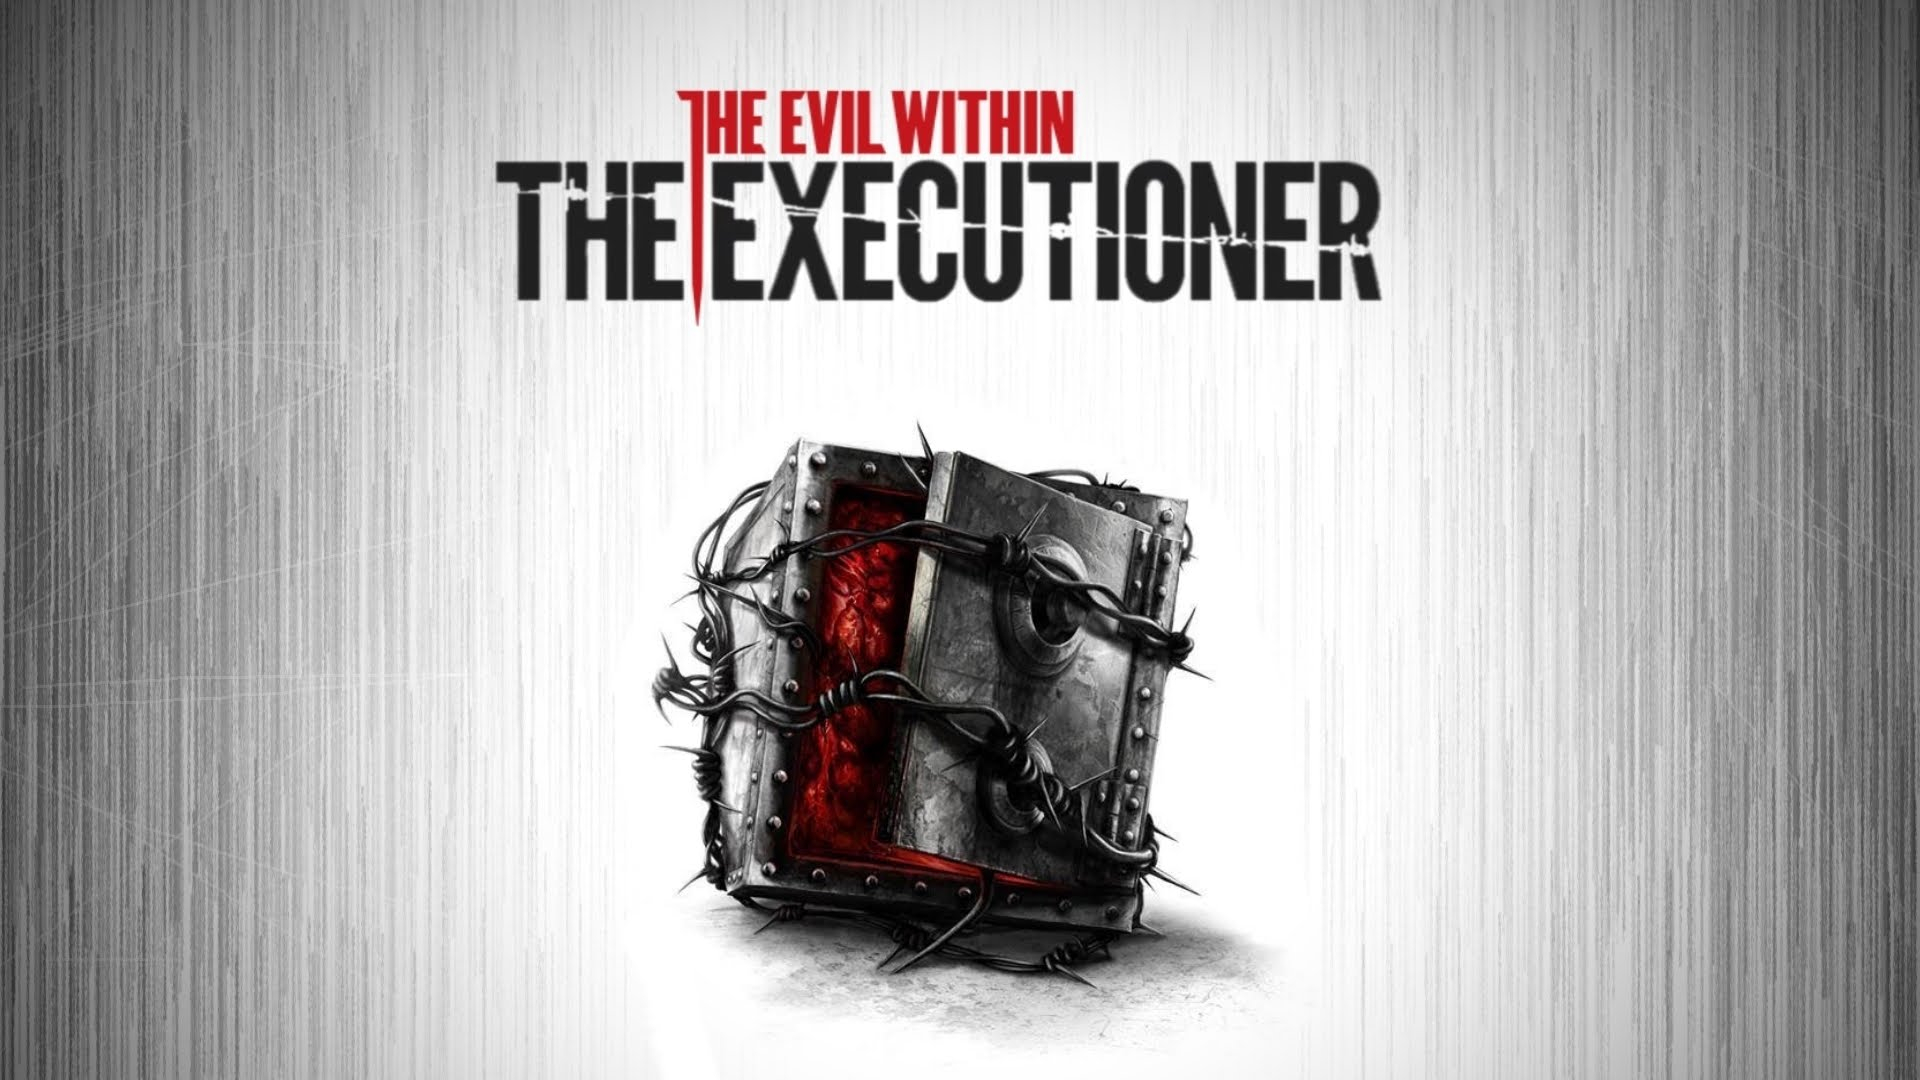 Трейлер #1 Evil Within: The Executioner, The